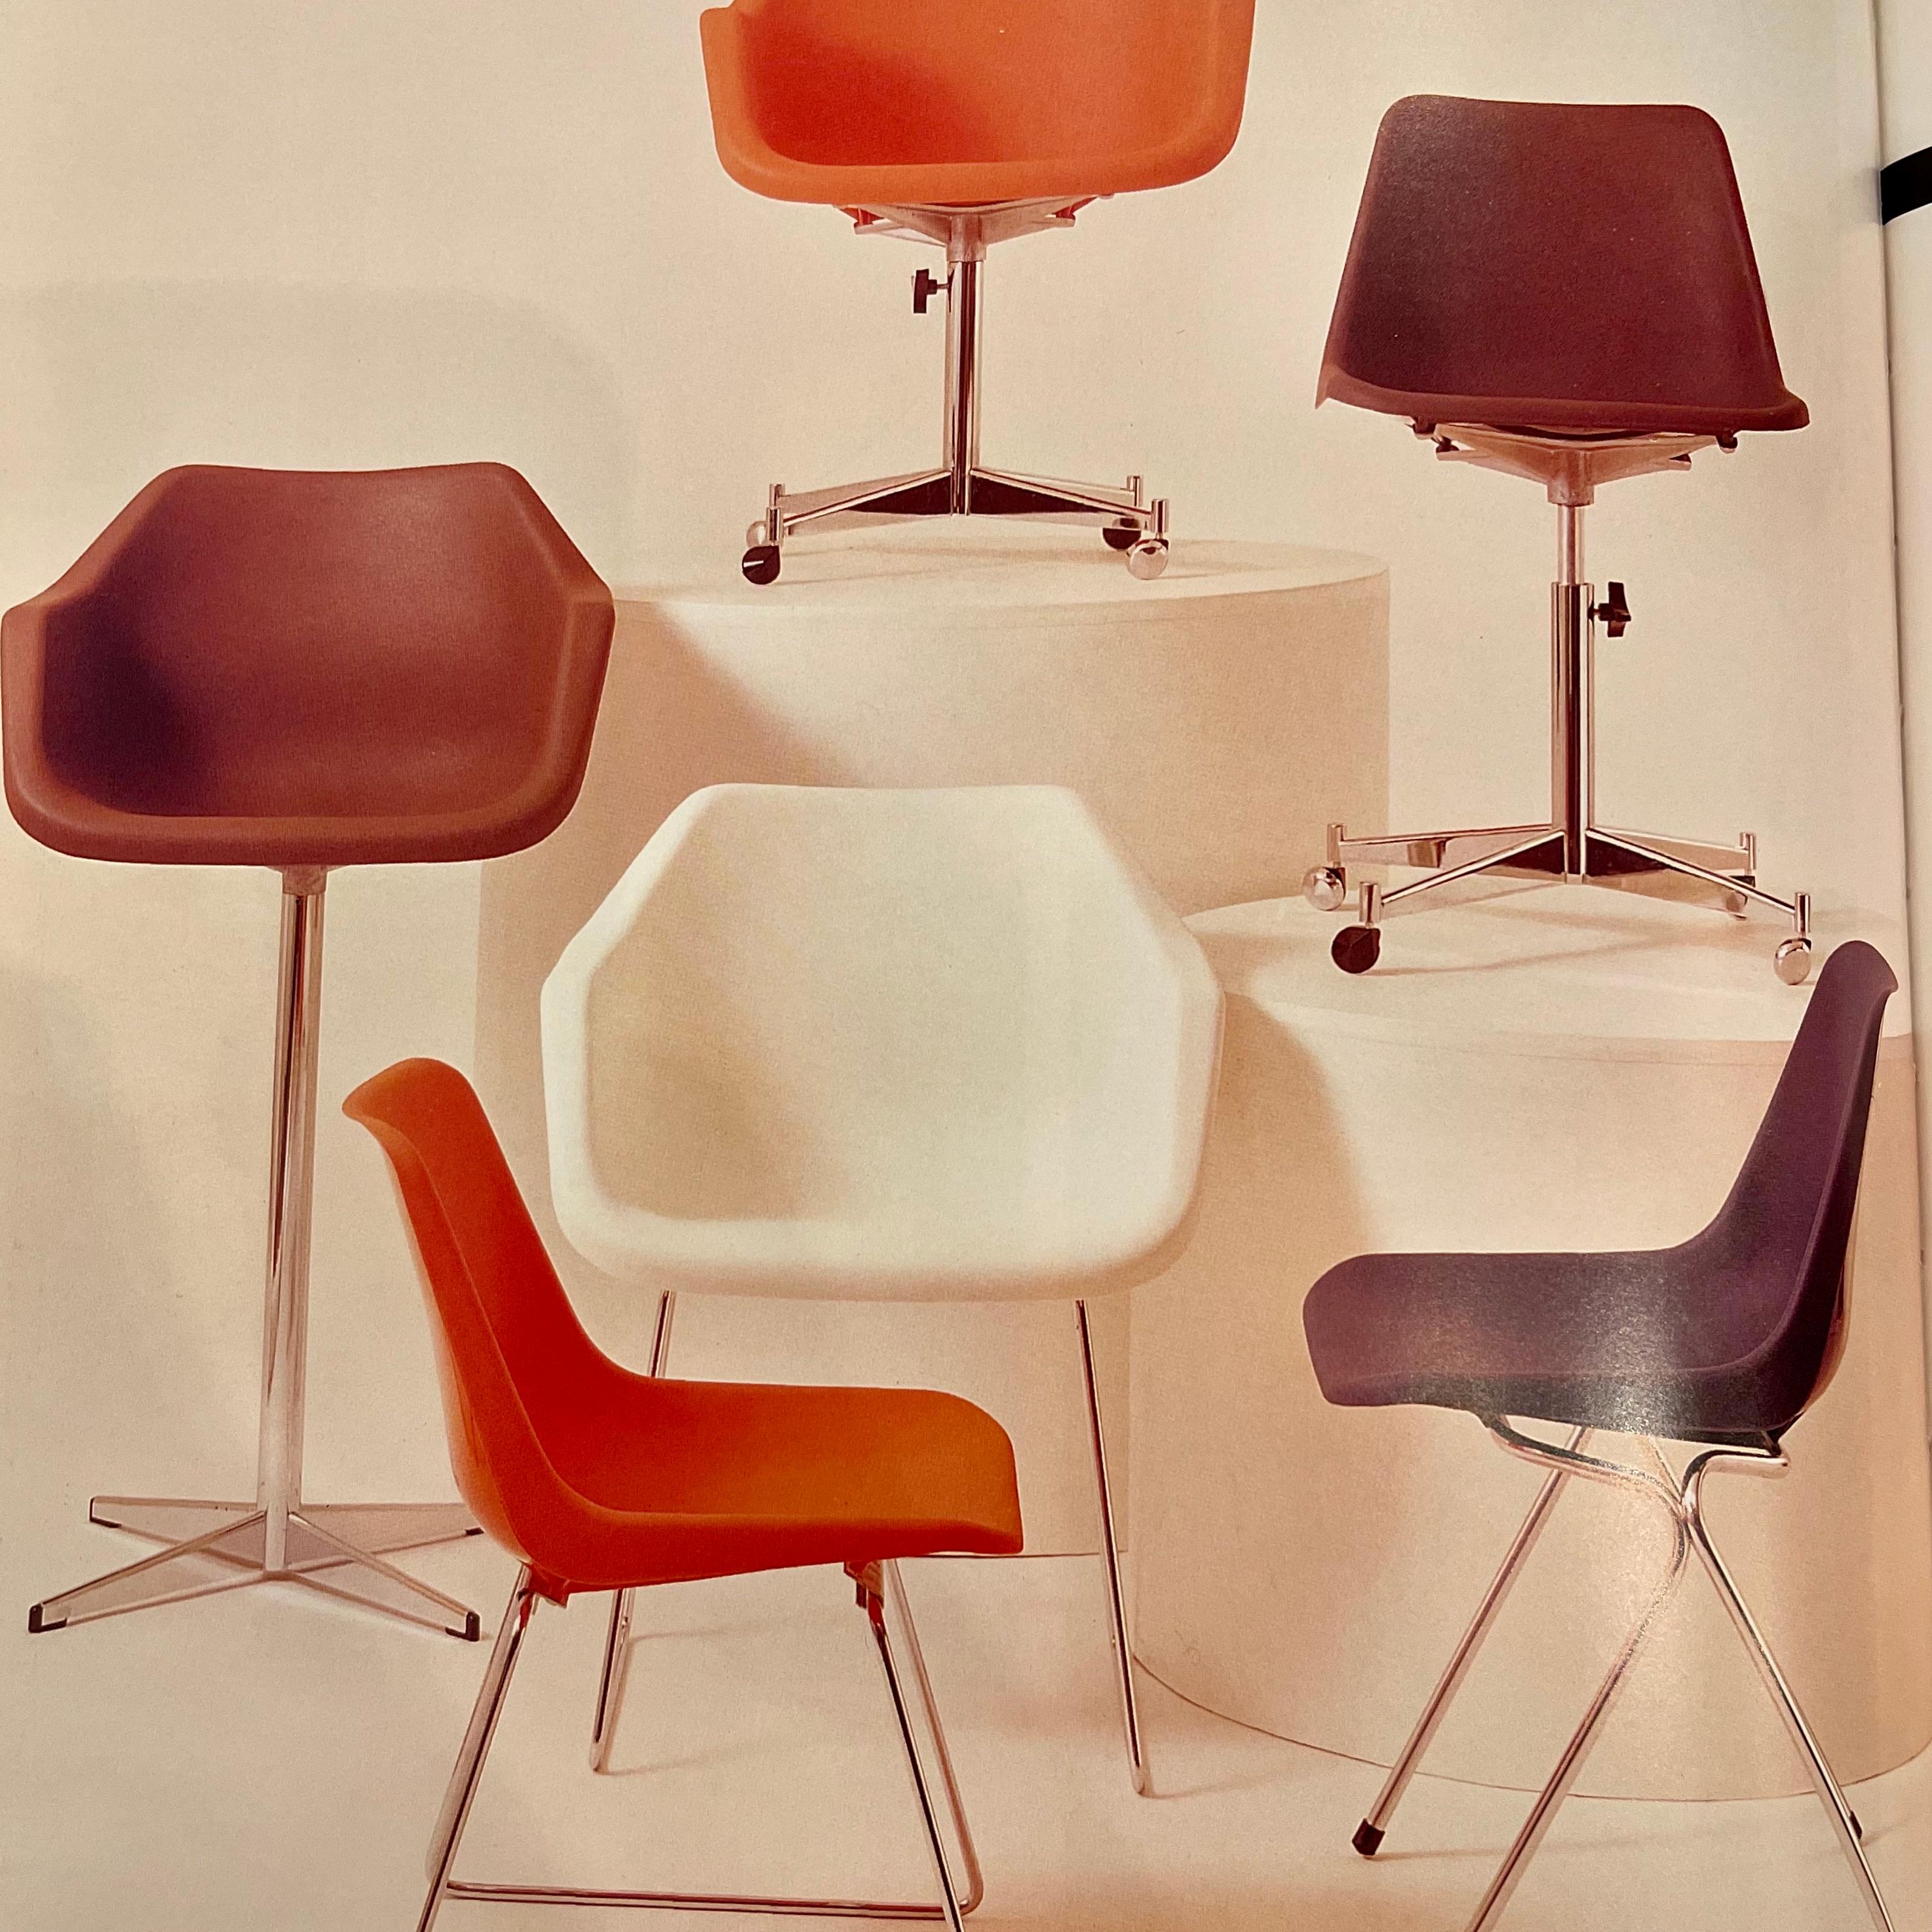 Robin & Lucienne Day: Pioneers of Contemporary Design, Jackson, Beazley, 2001 4